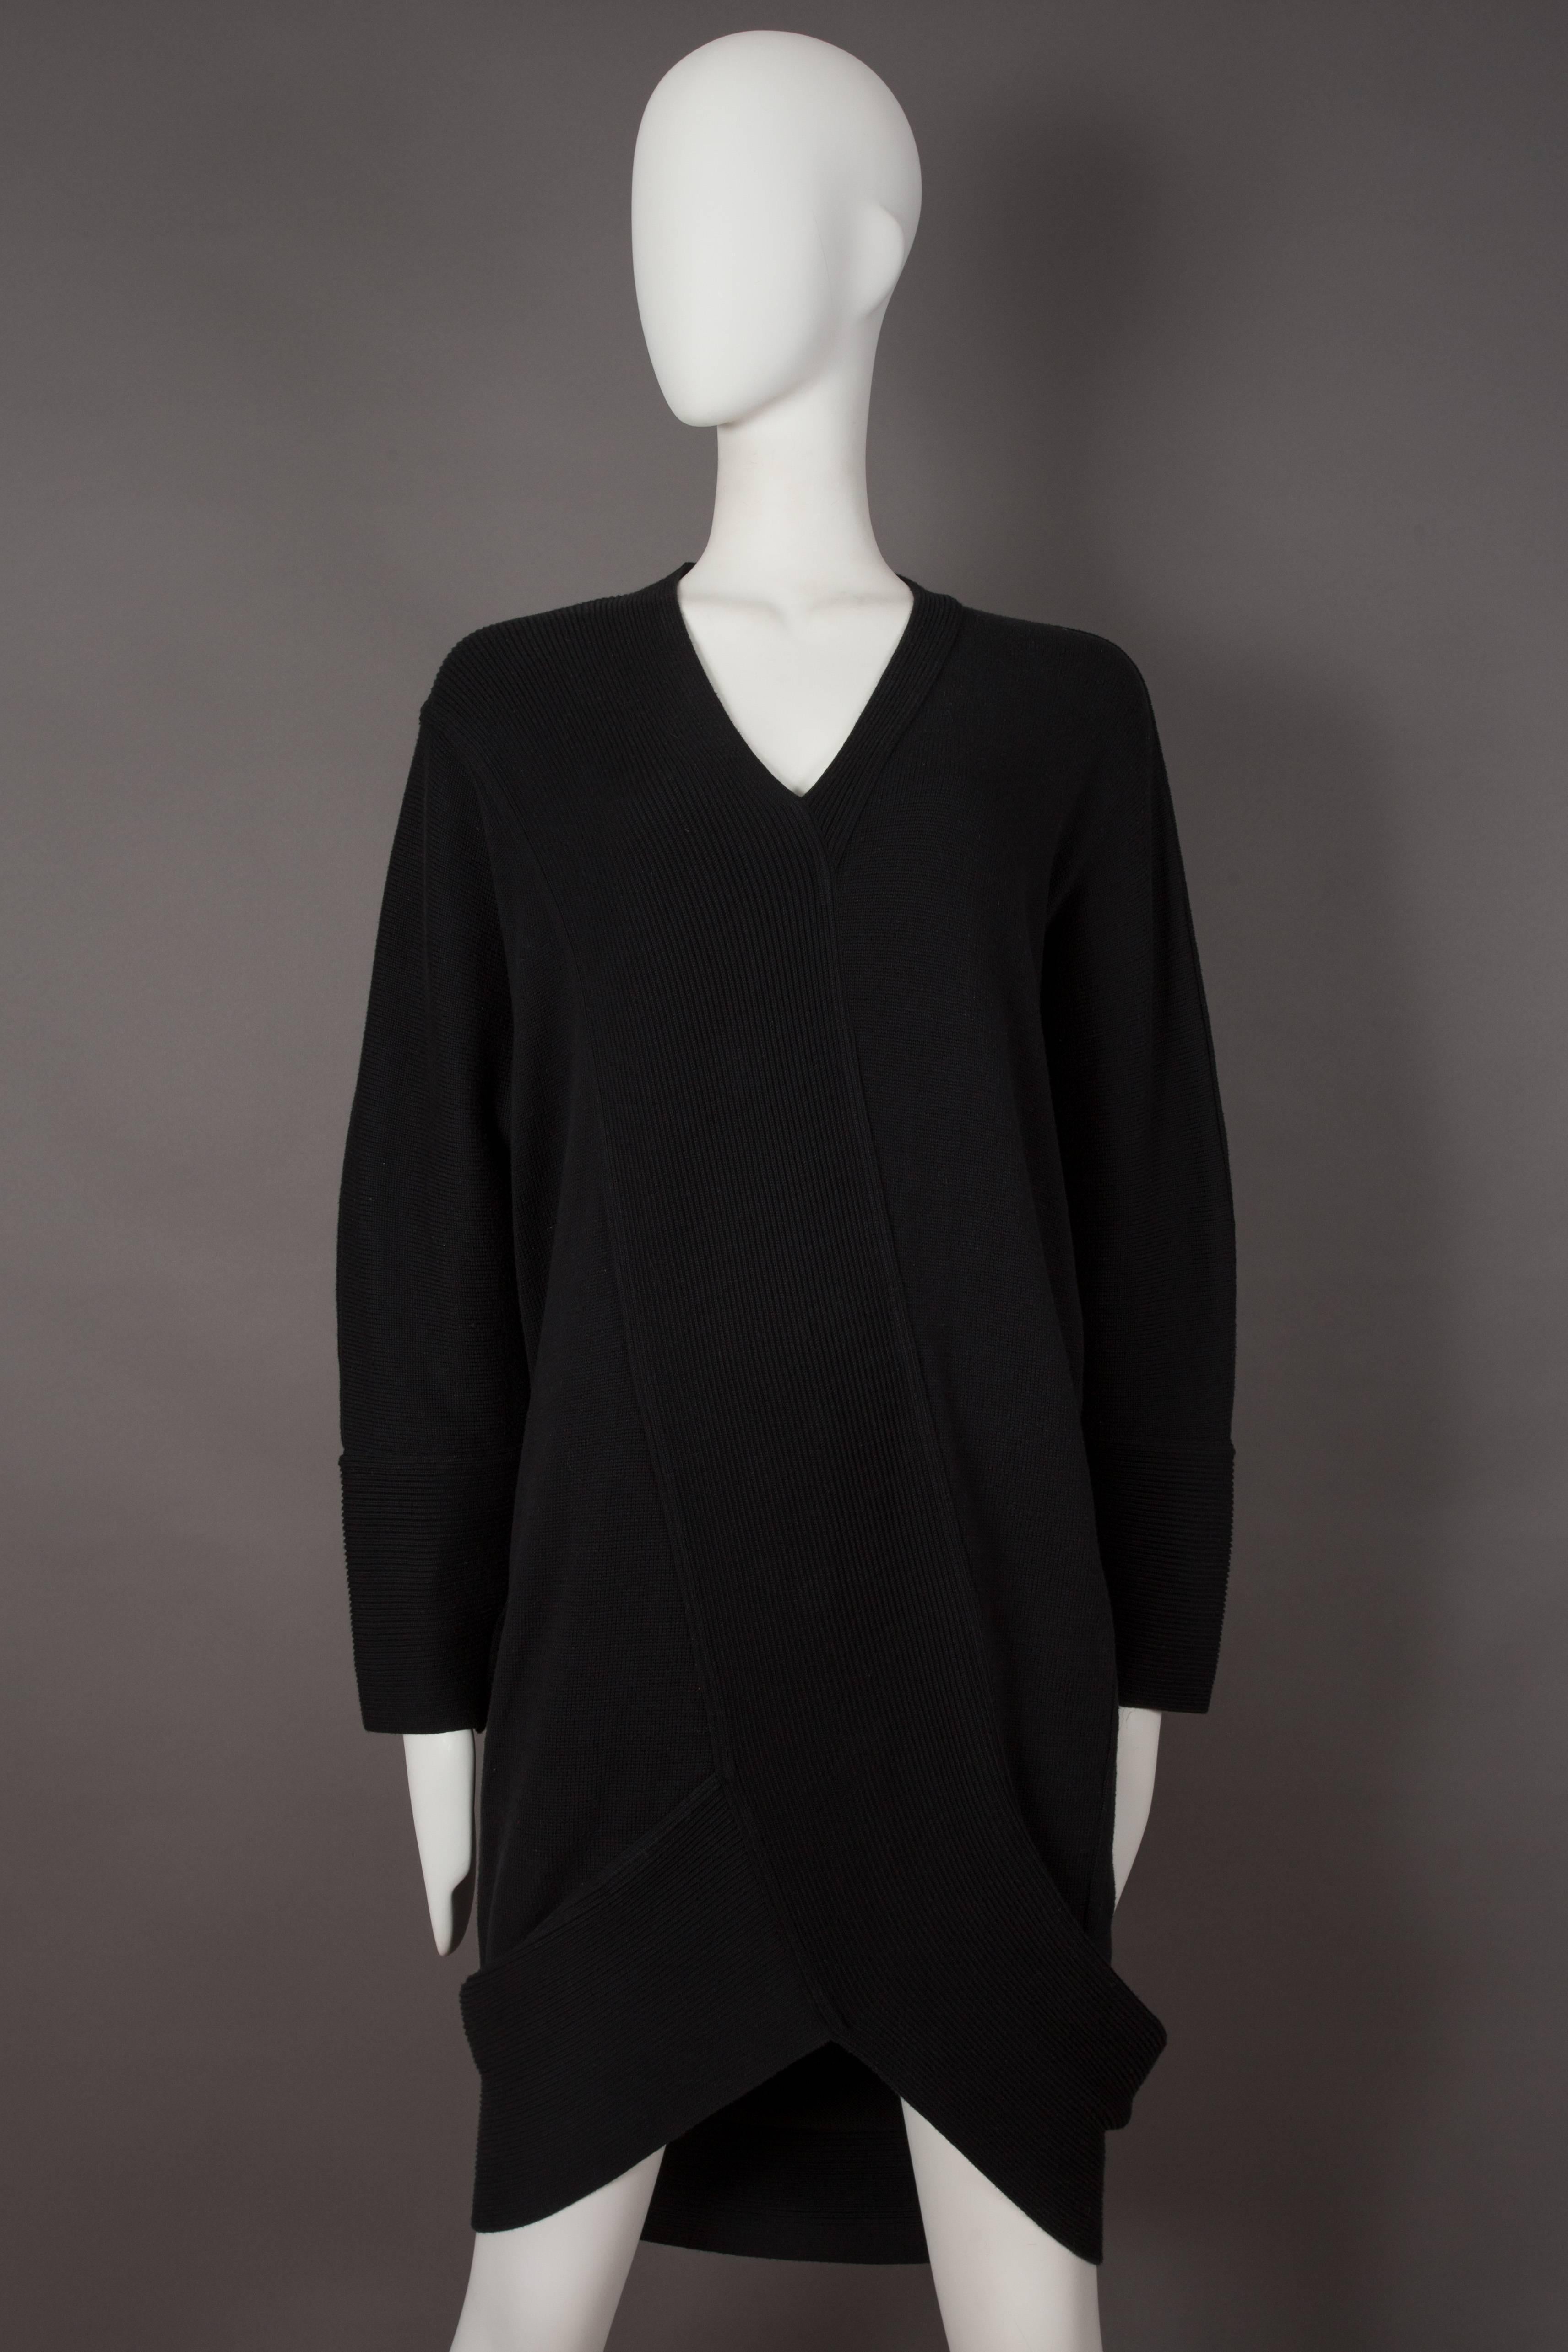 Early Issey Miyake black ribbed knit sweater dress, circa 1980s. The dress features a v-neck collar and large ribbed trim.